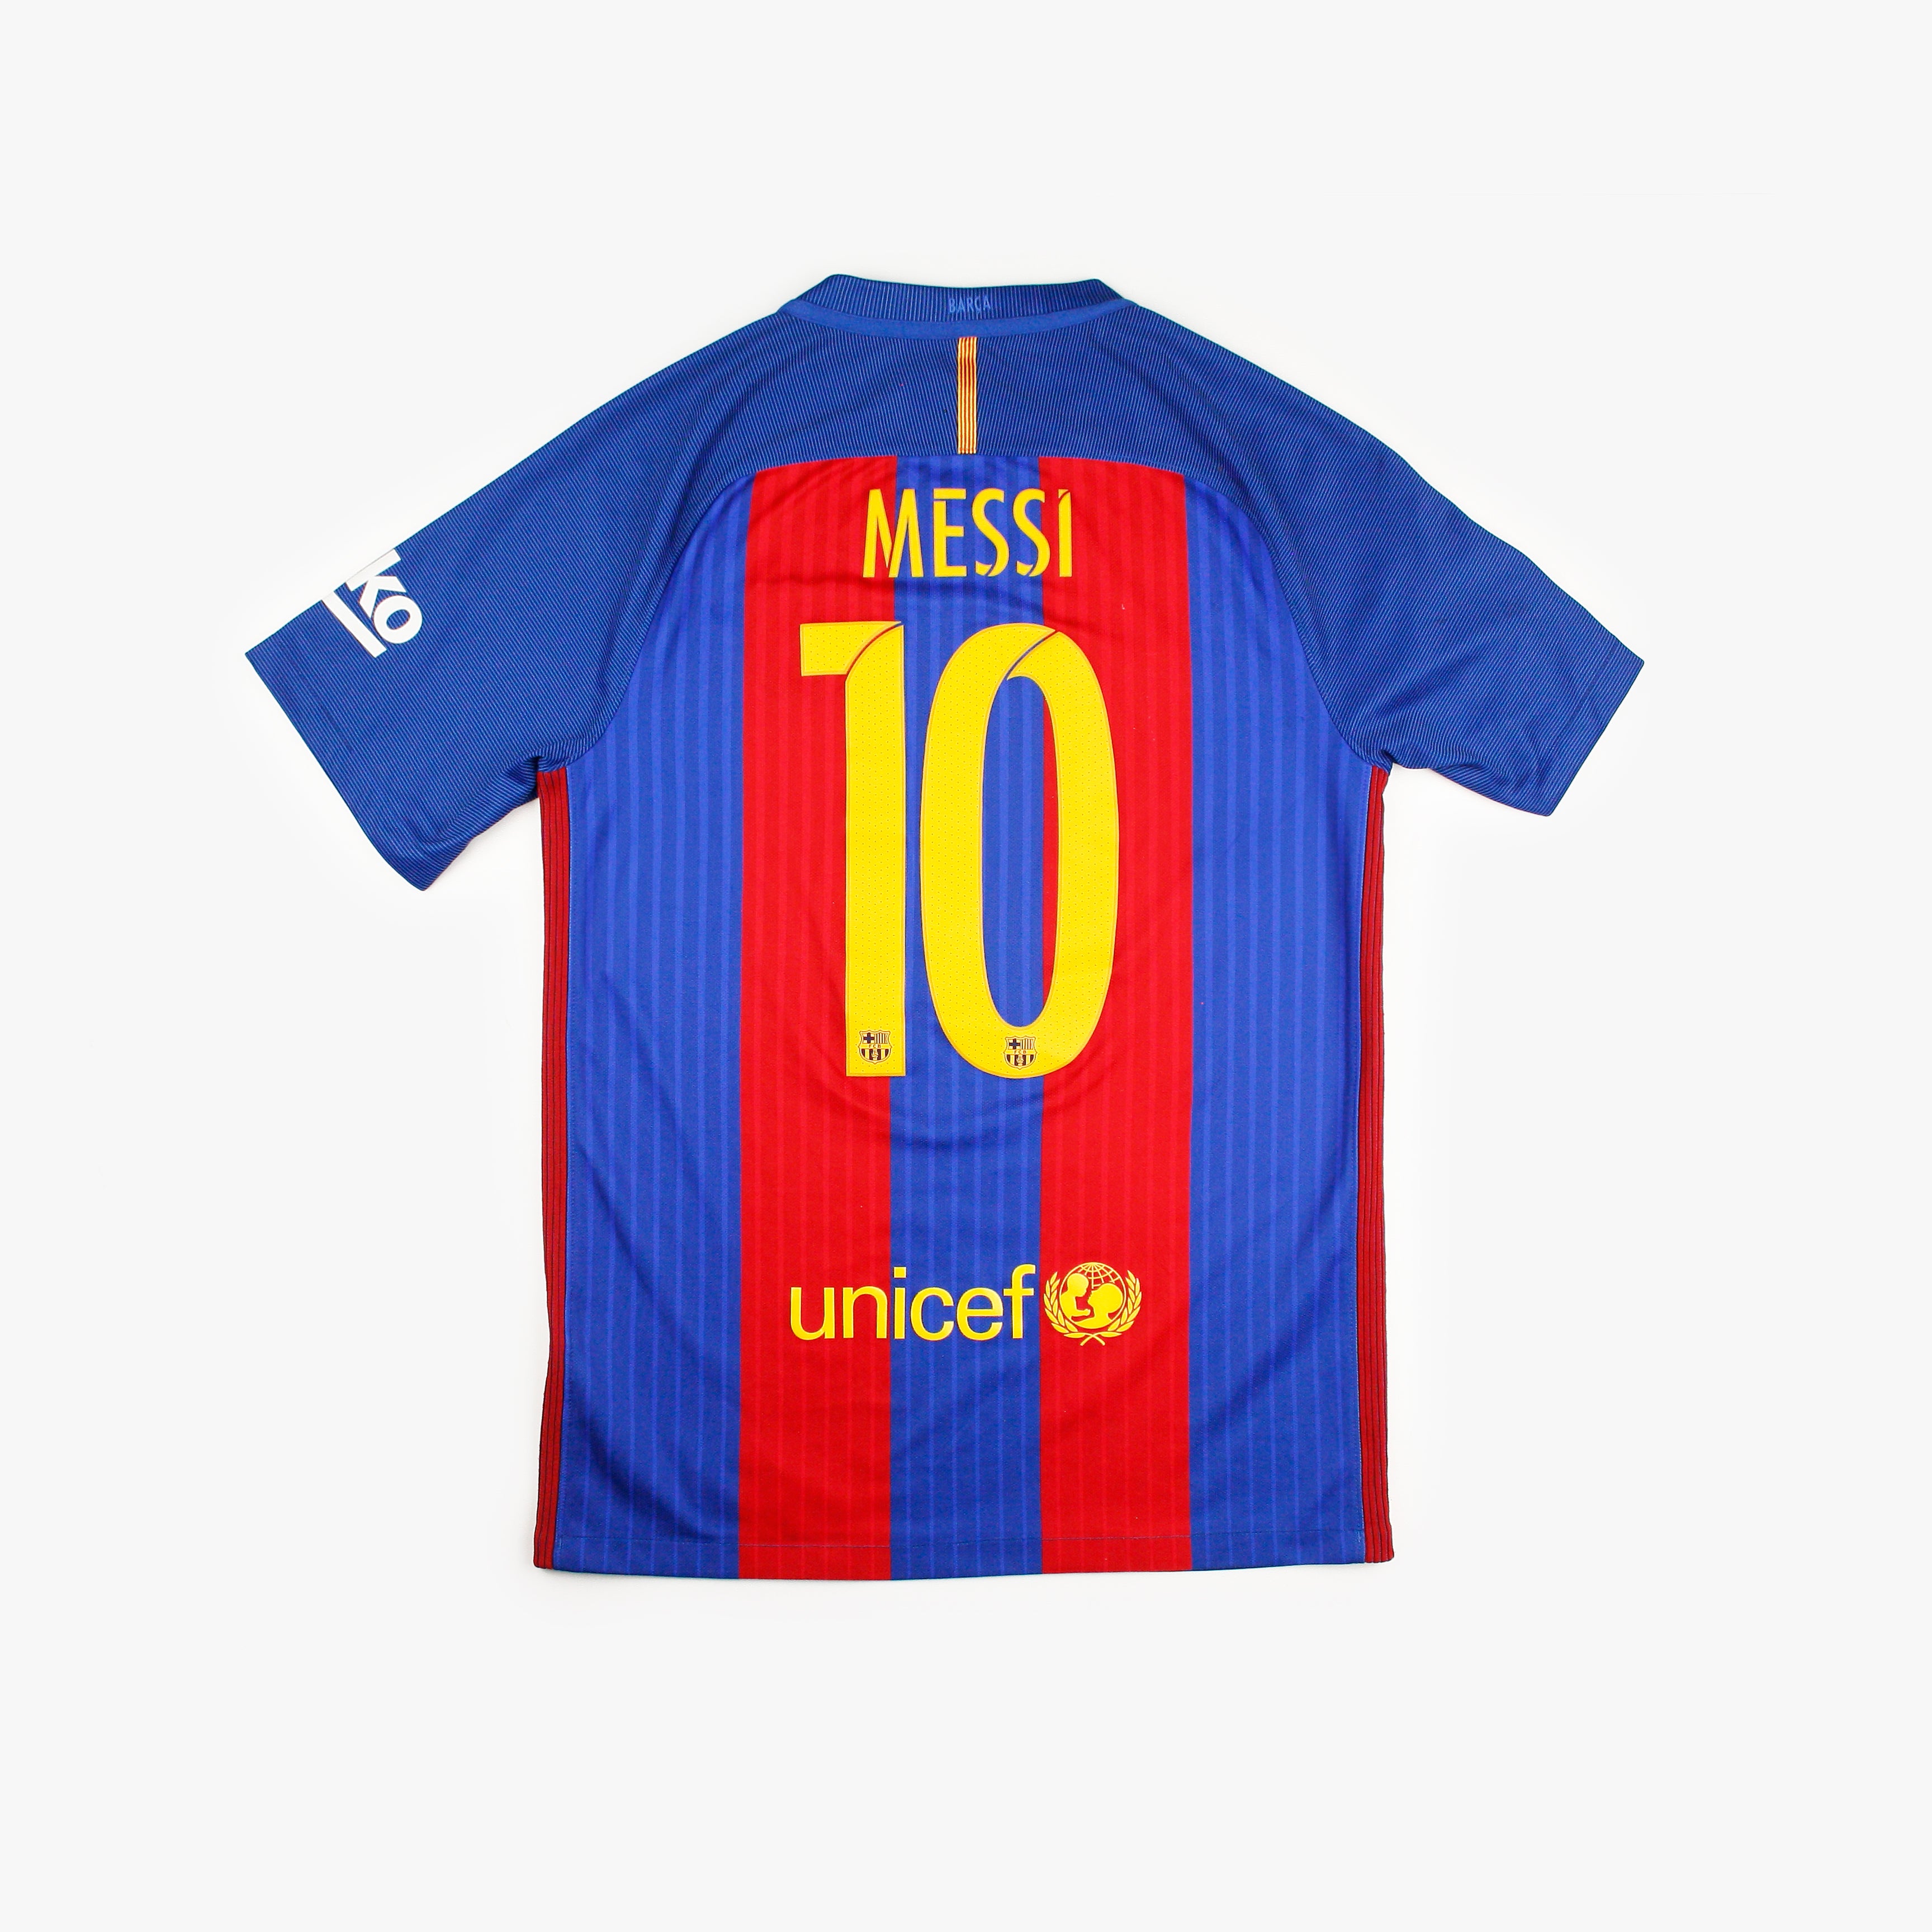 Pic: The 2016/17 Barcelona home kit – Back Page Football